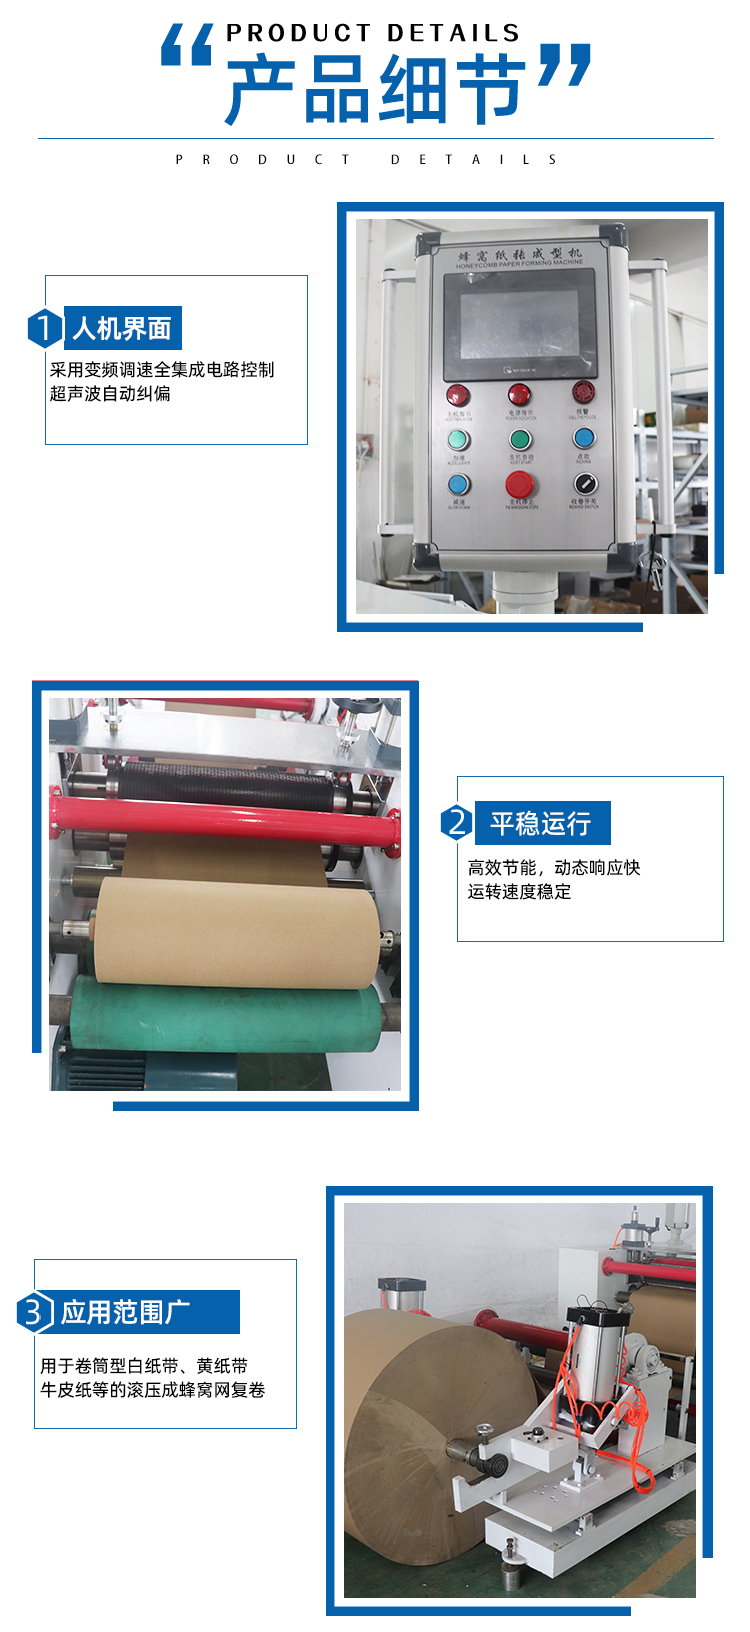 Juniu Mechanical Honeycomb Paper Net Forming Machine Produces Cosmetic Cushion Packaging Paper Hand Pull Honeycomb Paper Flower Packaging